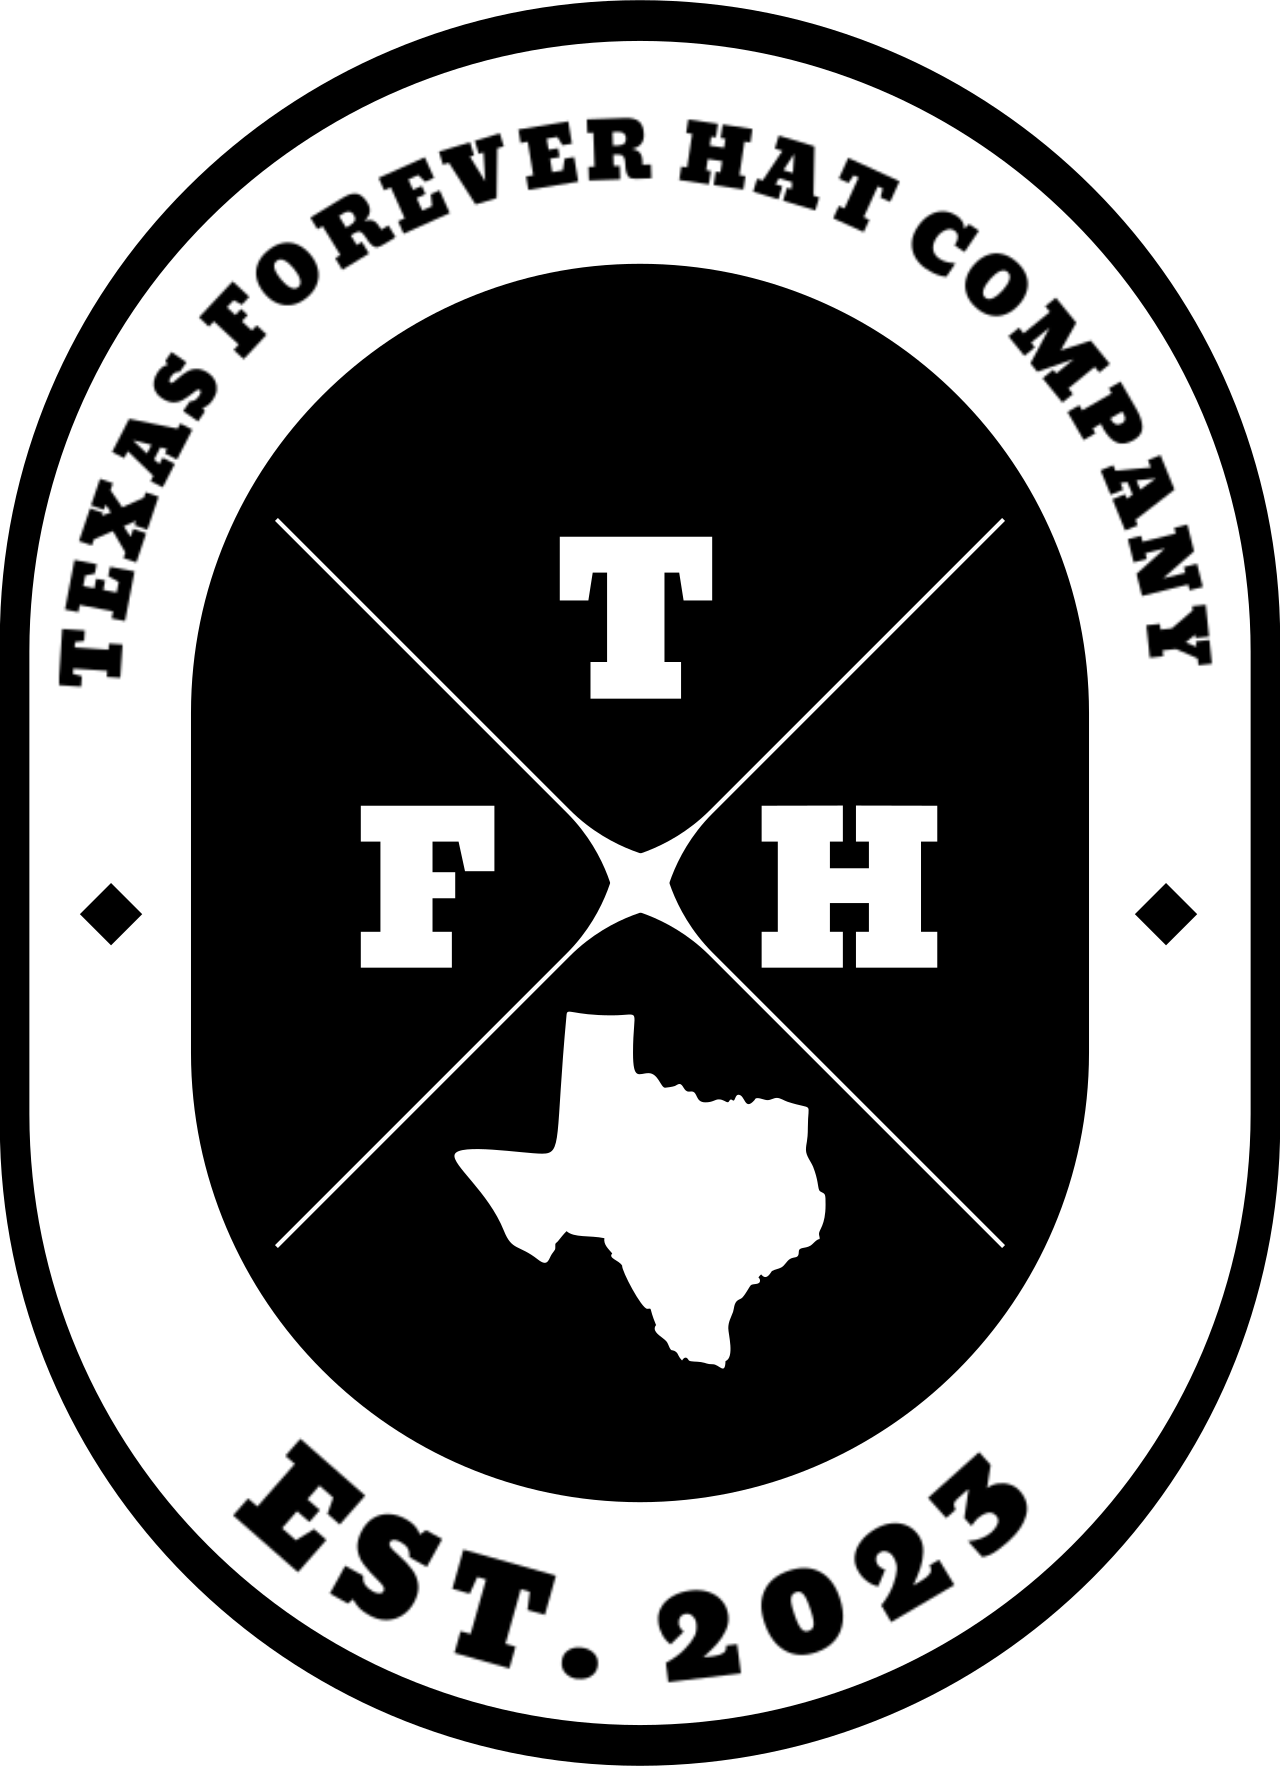 TEXAS FOREVER HAT COMPANY 's logo